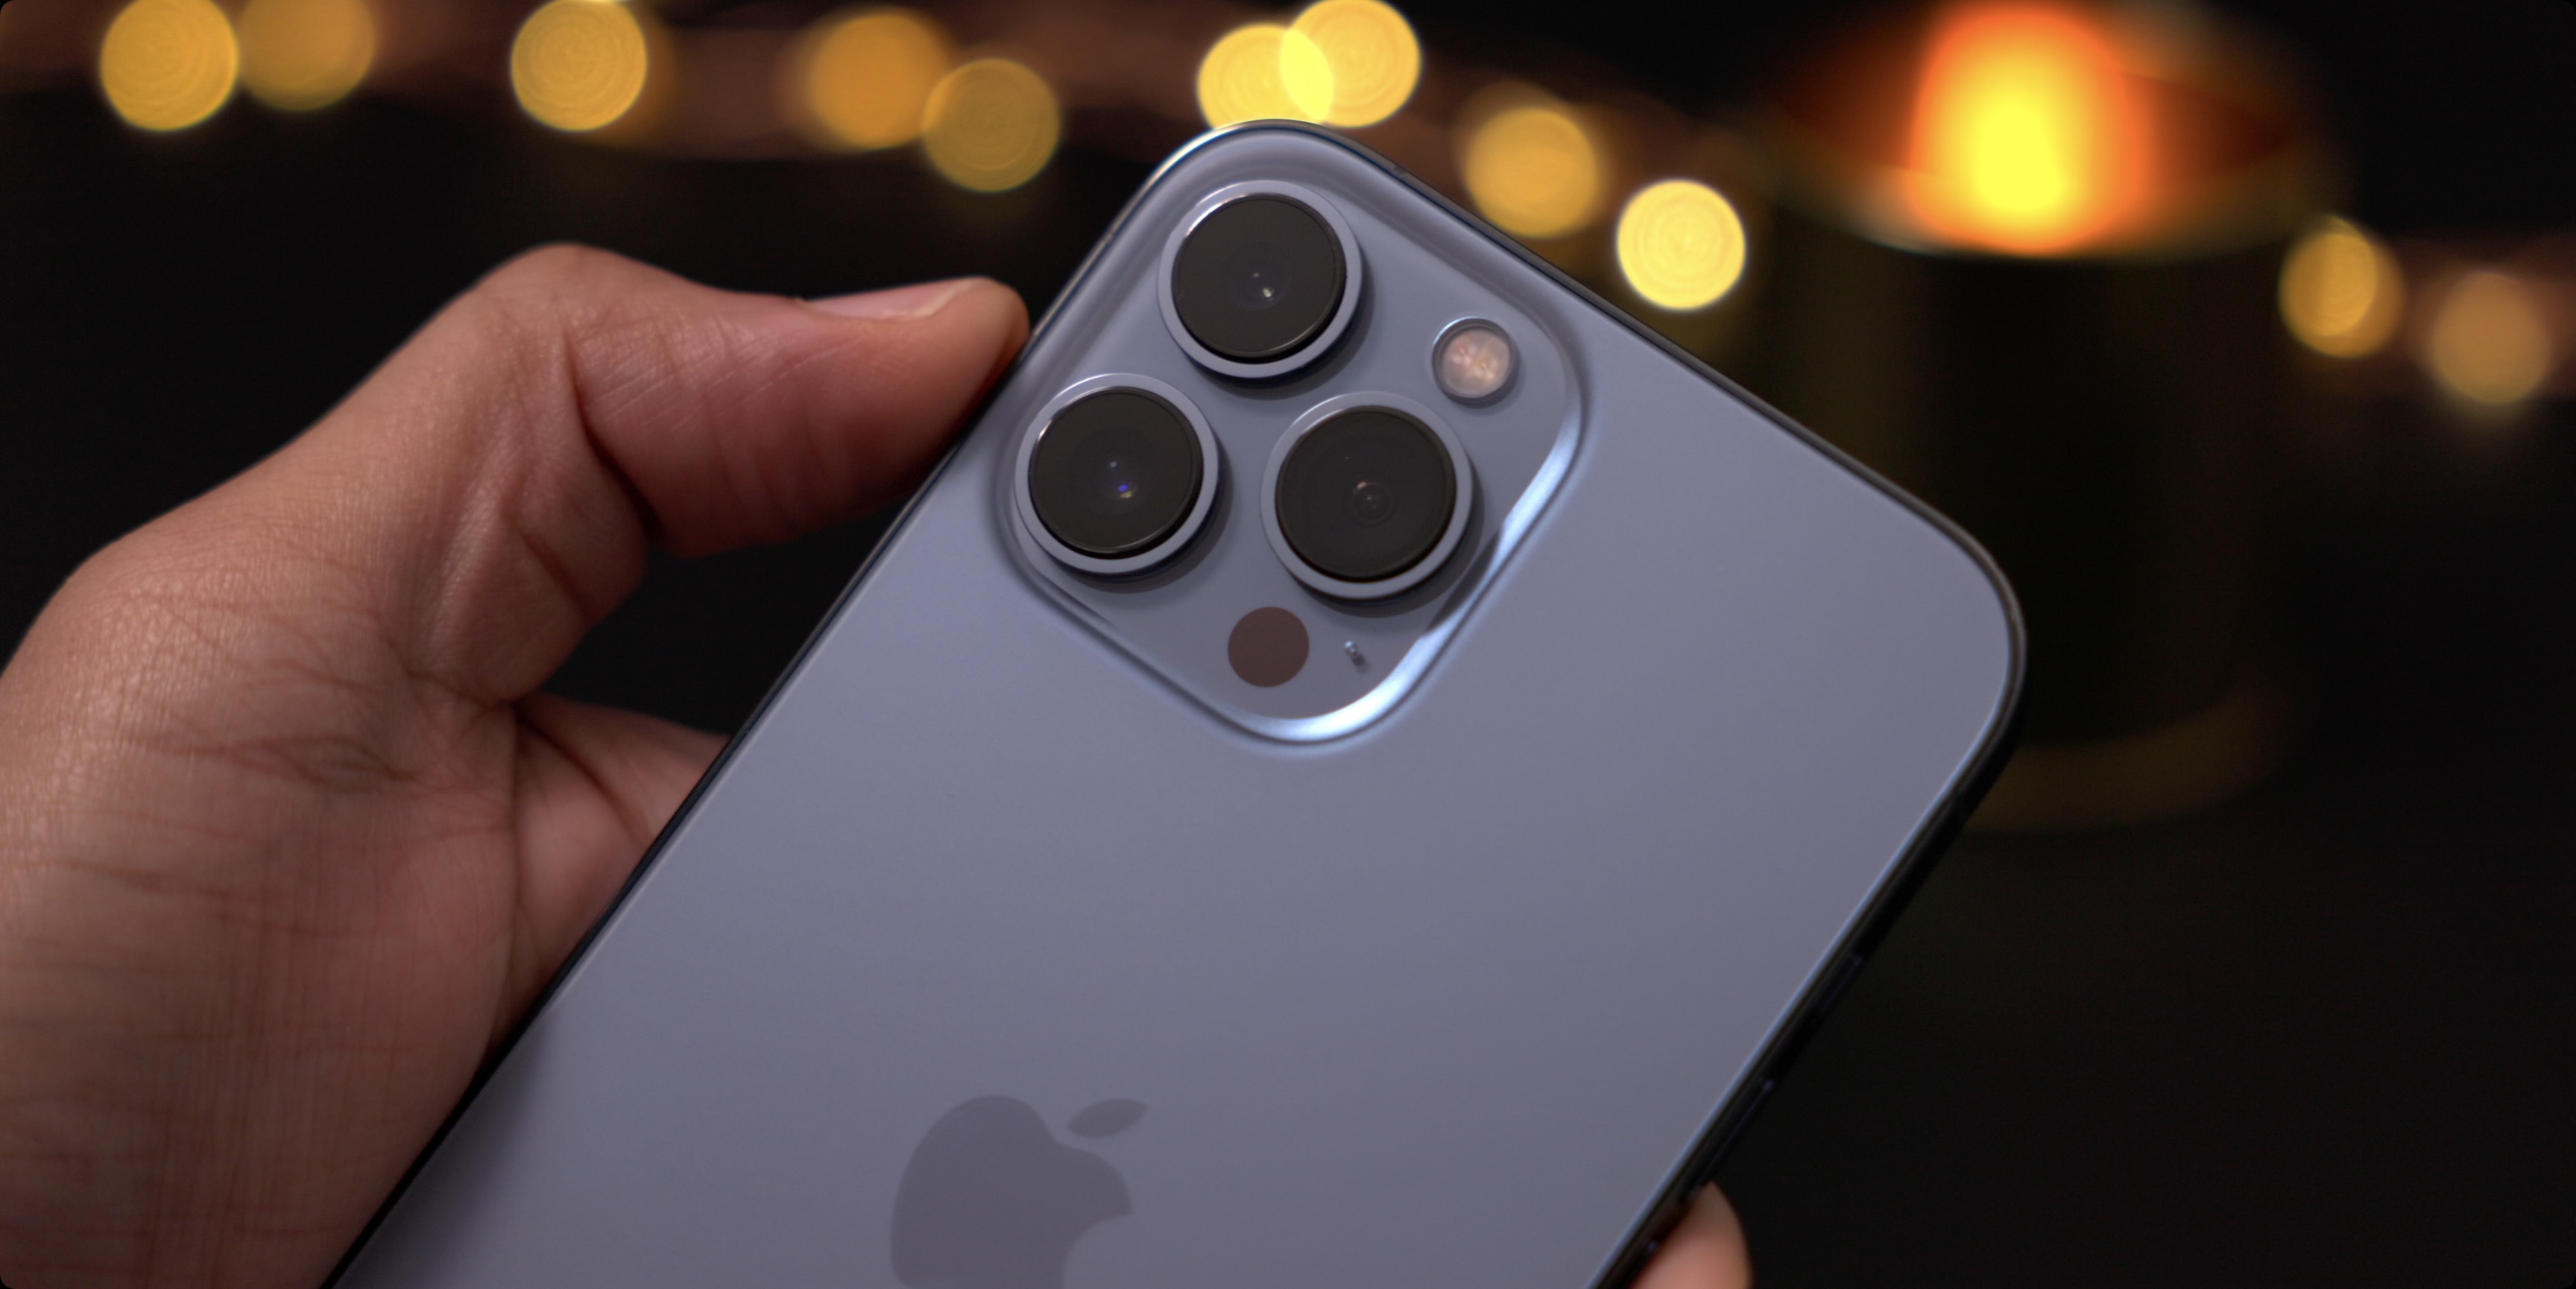 Rumor: Apple's iPhone 15 Pro could get a major camera upgrade with